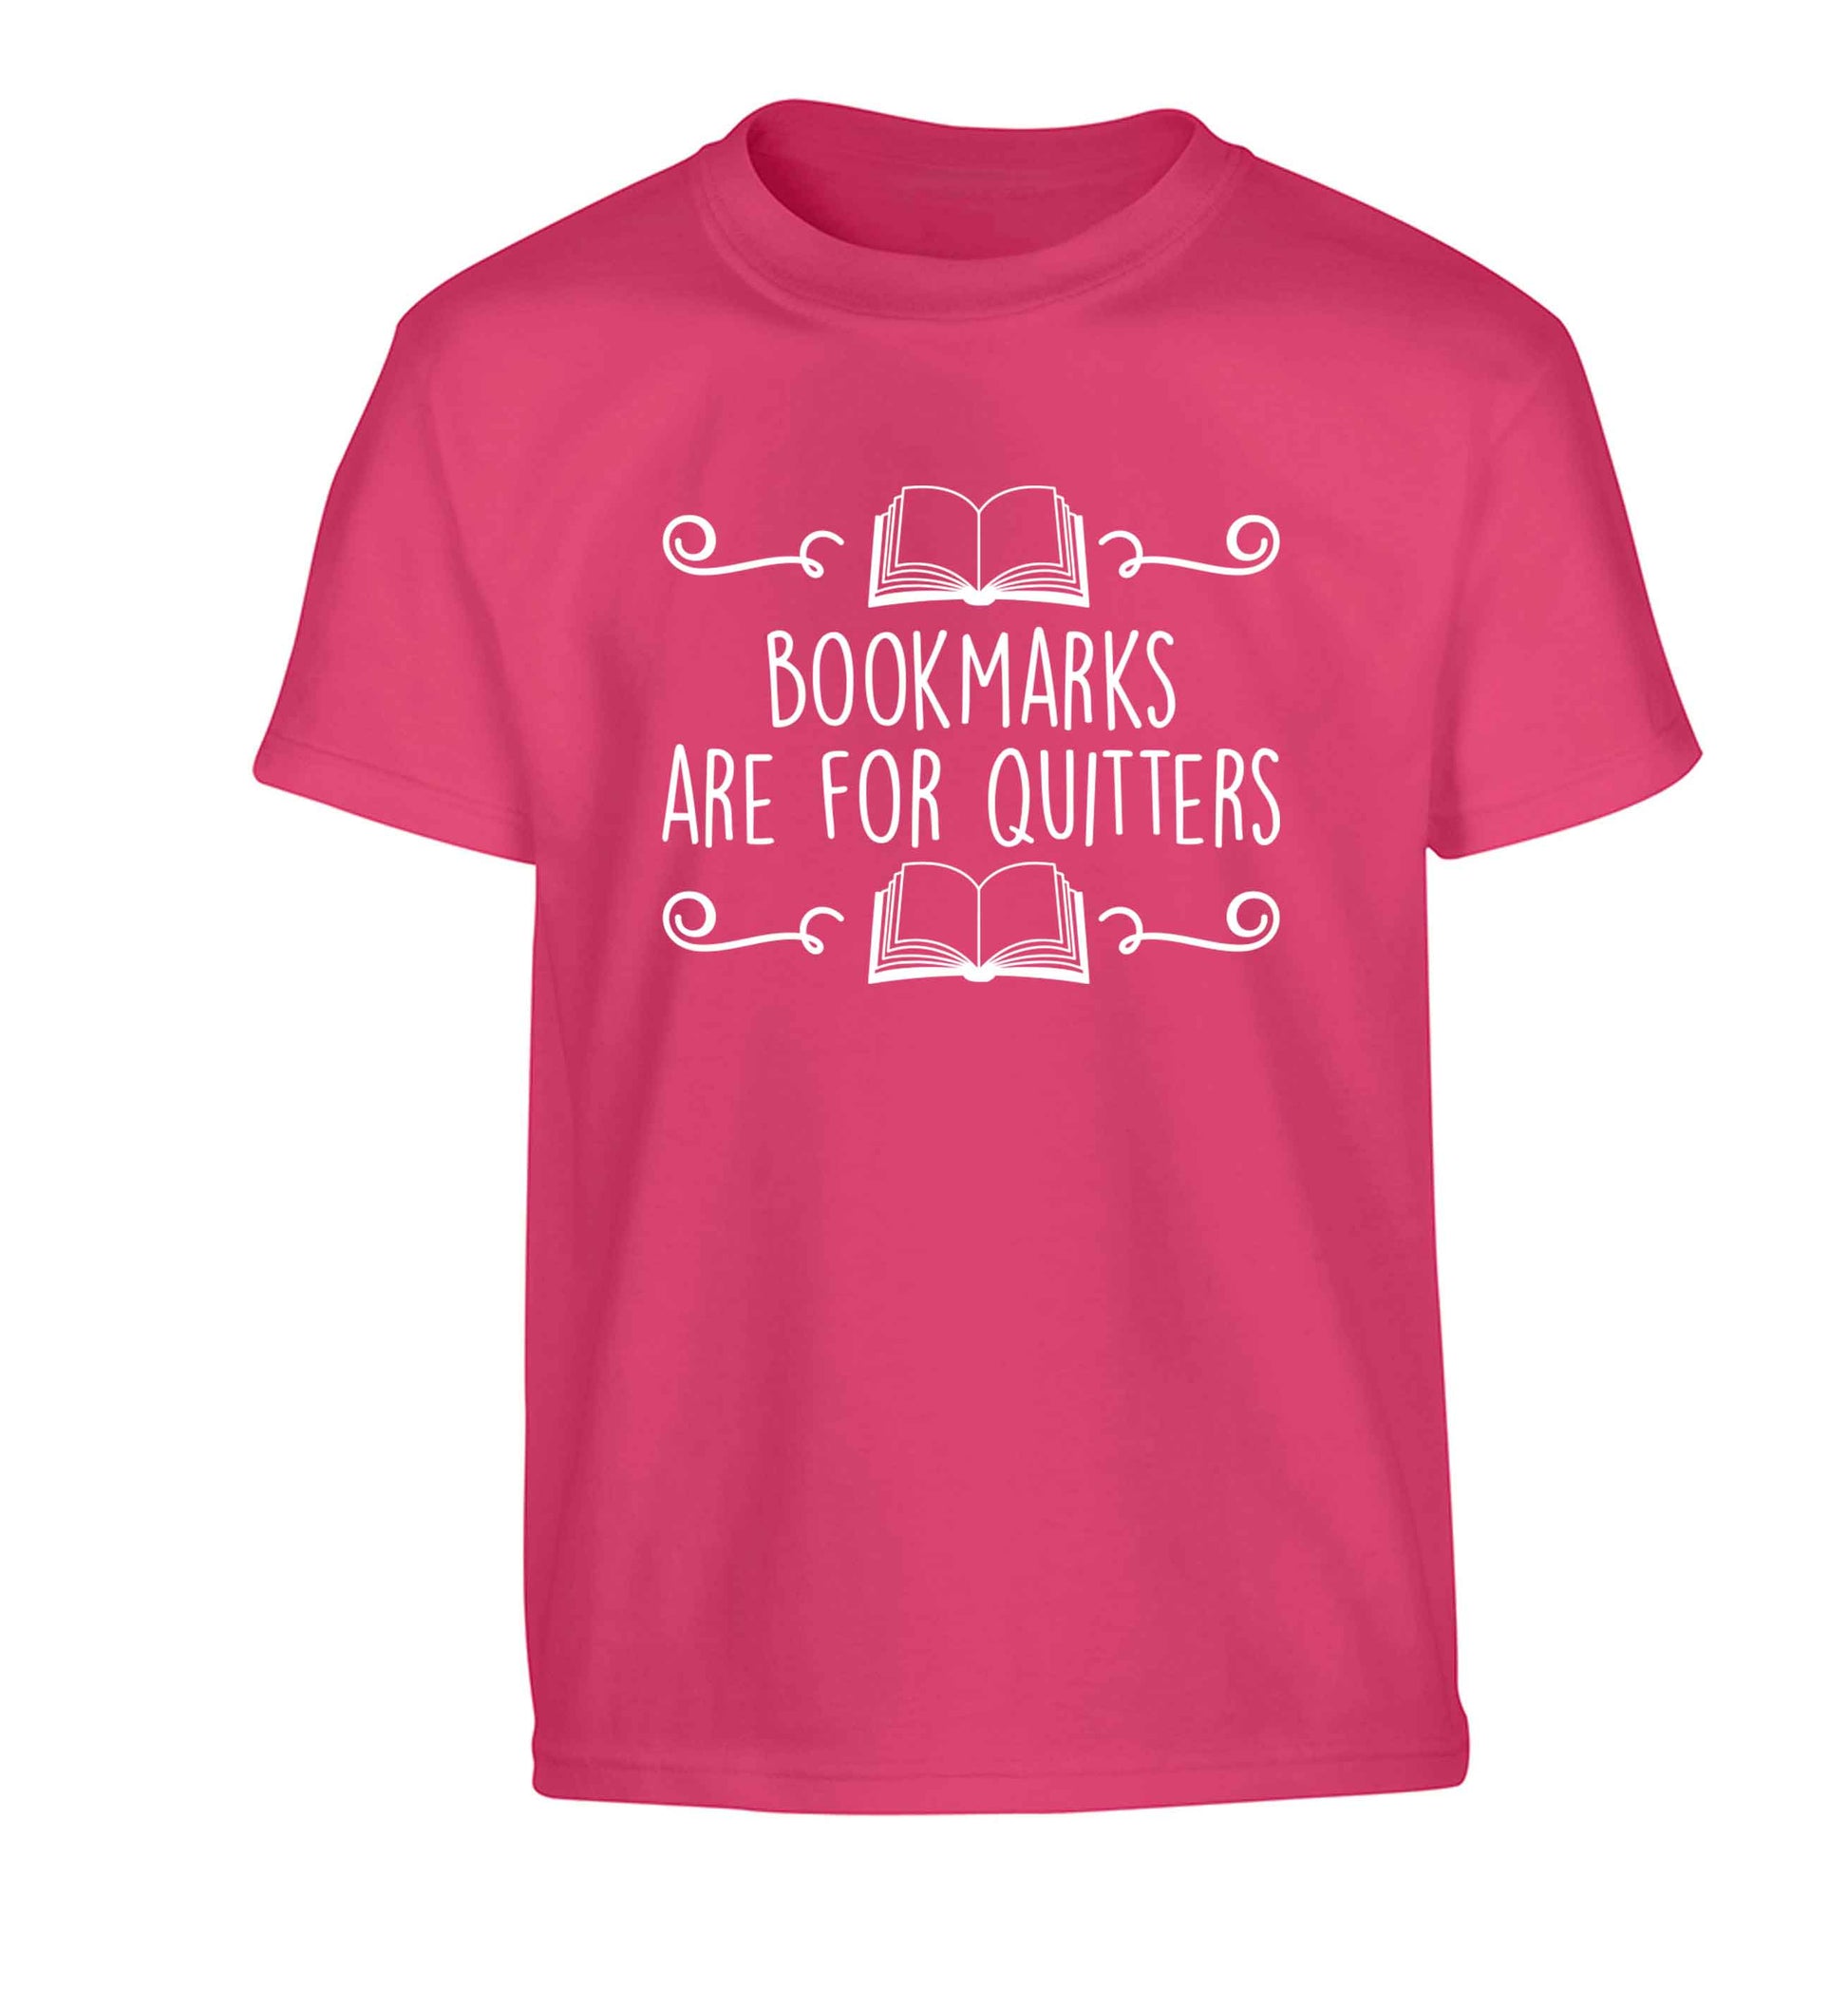 Bookmarks are for quitters Children's pink Tshirt 12-13 Years